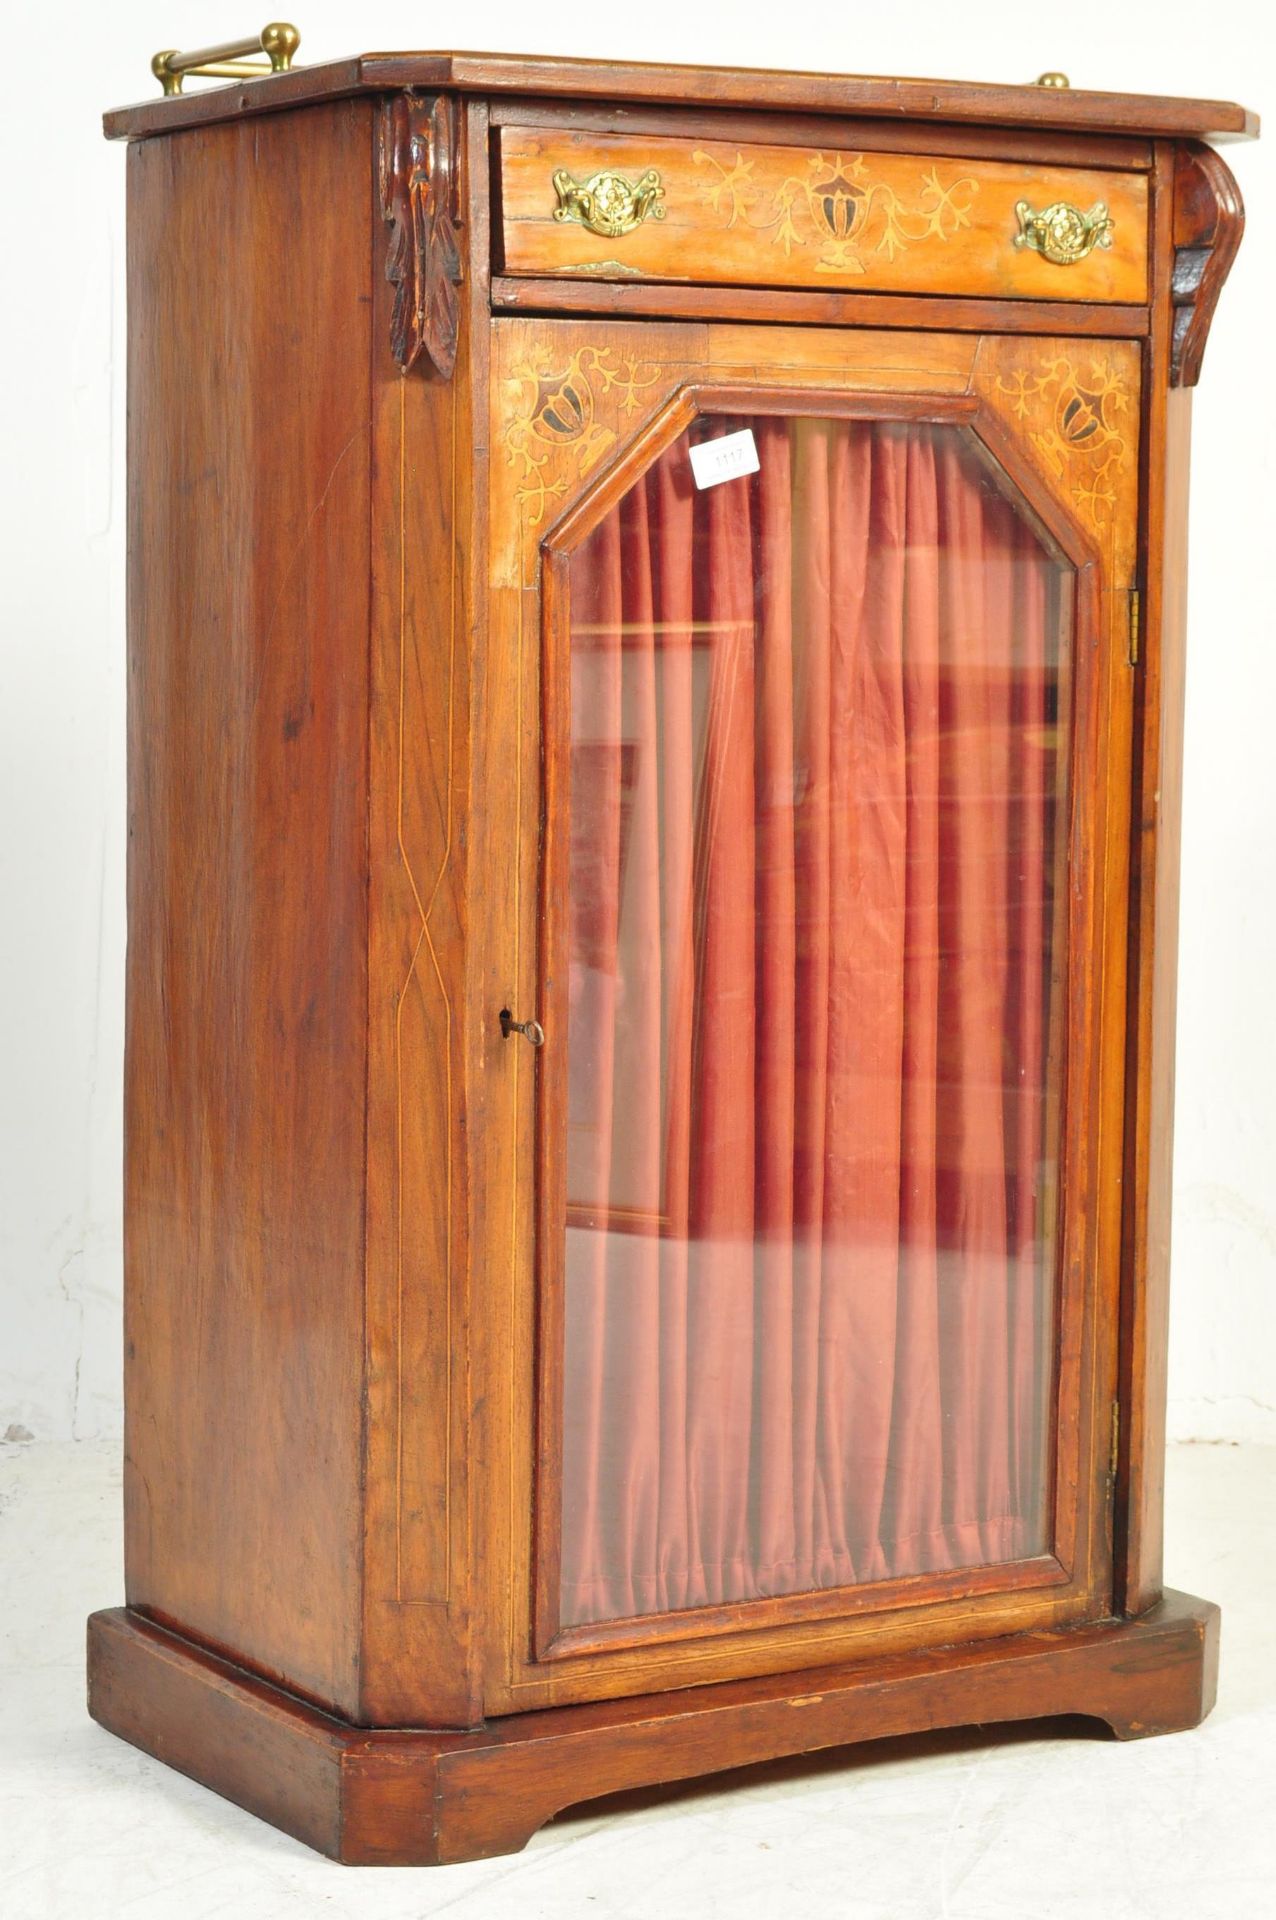 LATE 19TH CENTURY MARQUETRY INLAID PEDESTAL MUSIC CABINET